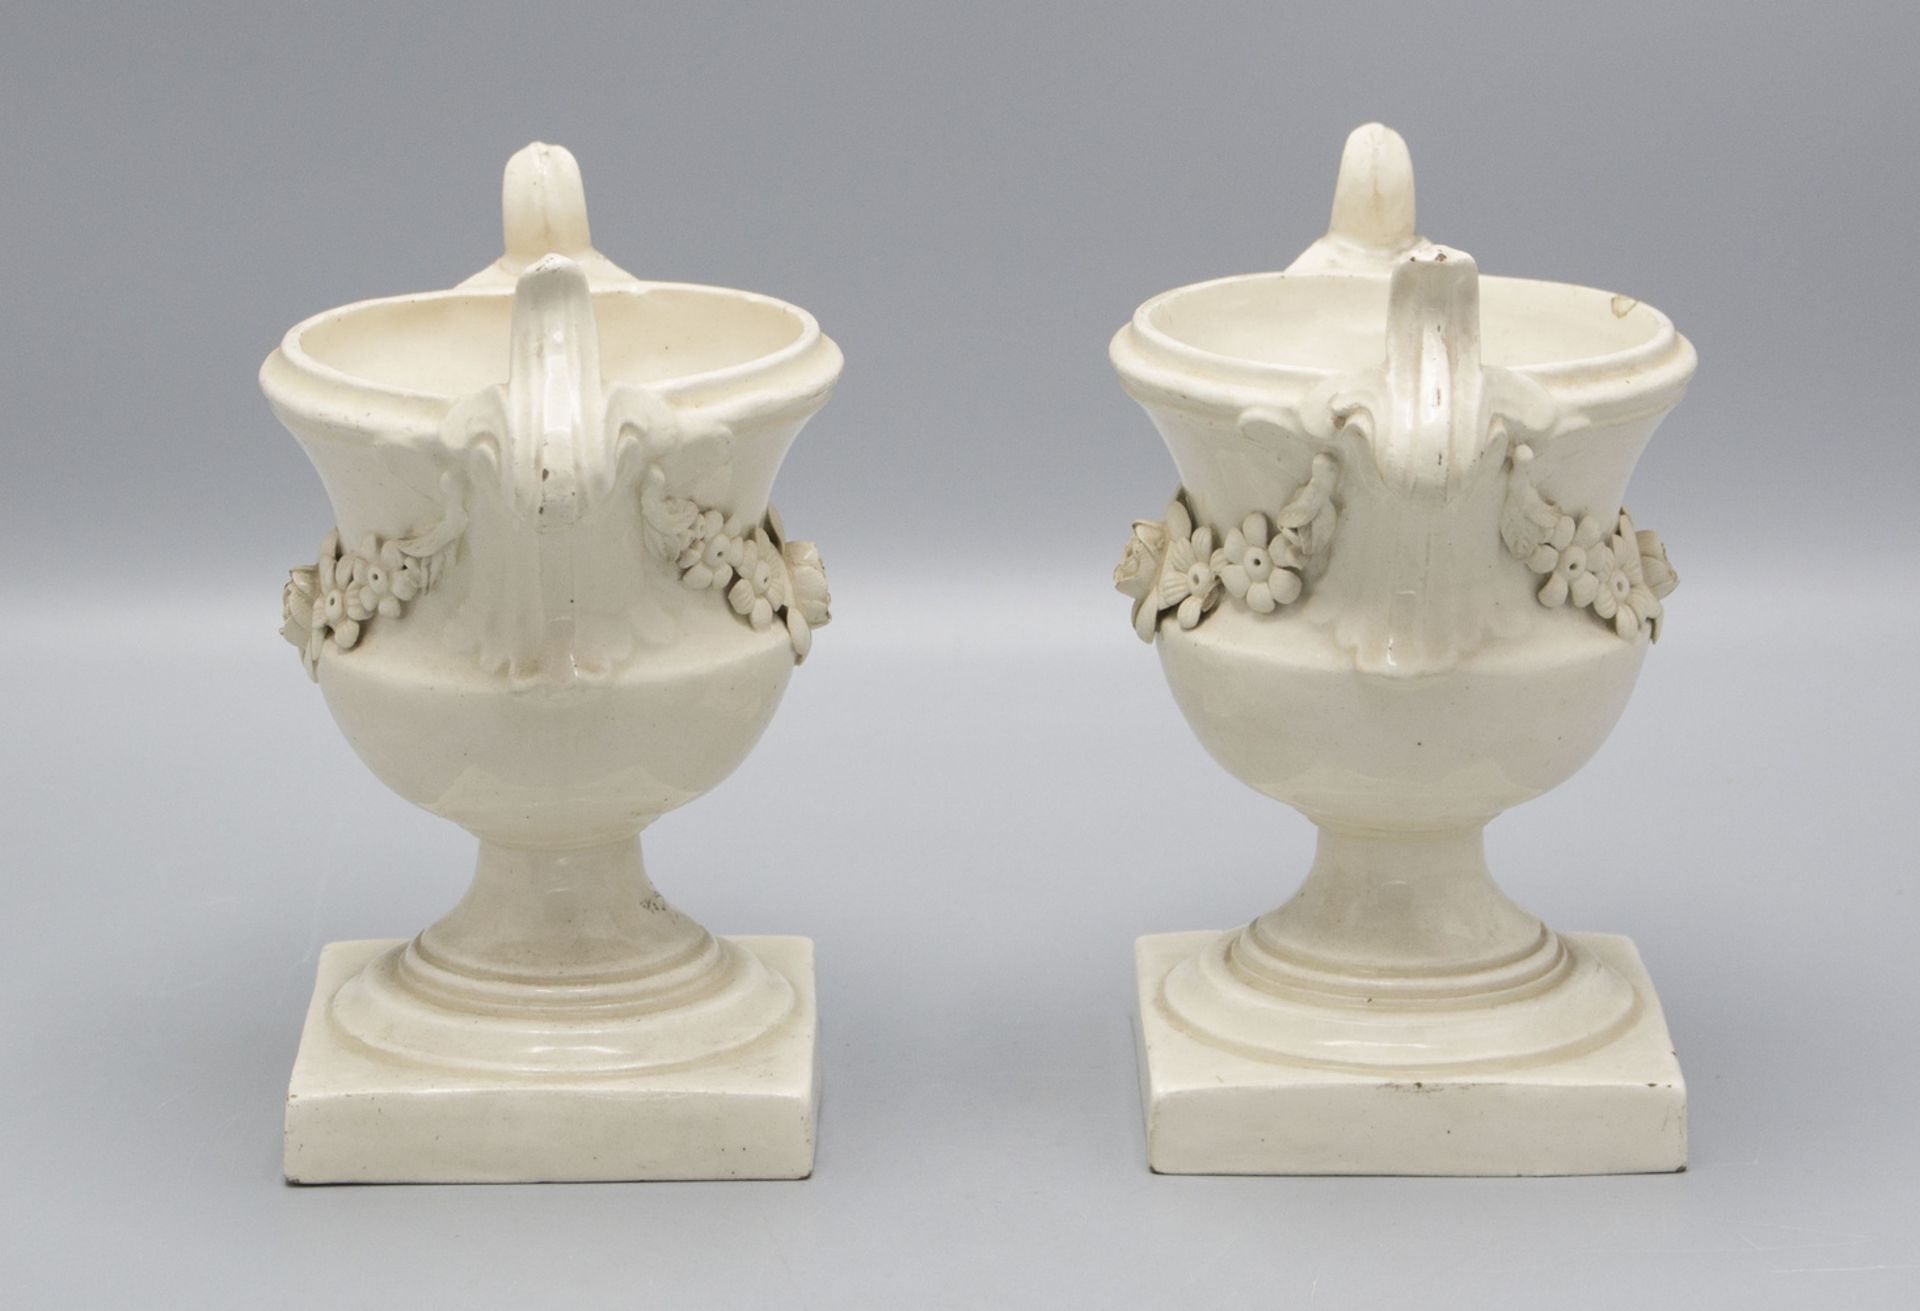 Paar Creamware Kratervasen / A pair of creamware / pearlware / faience fine footed vases, ... - Image 2 of 3